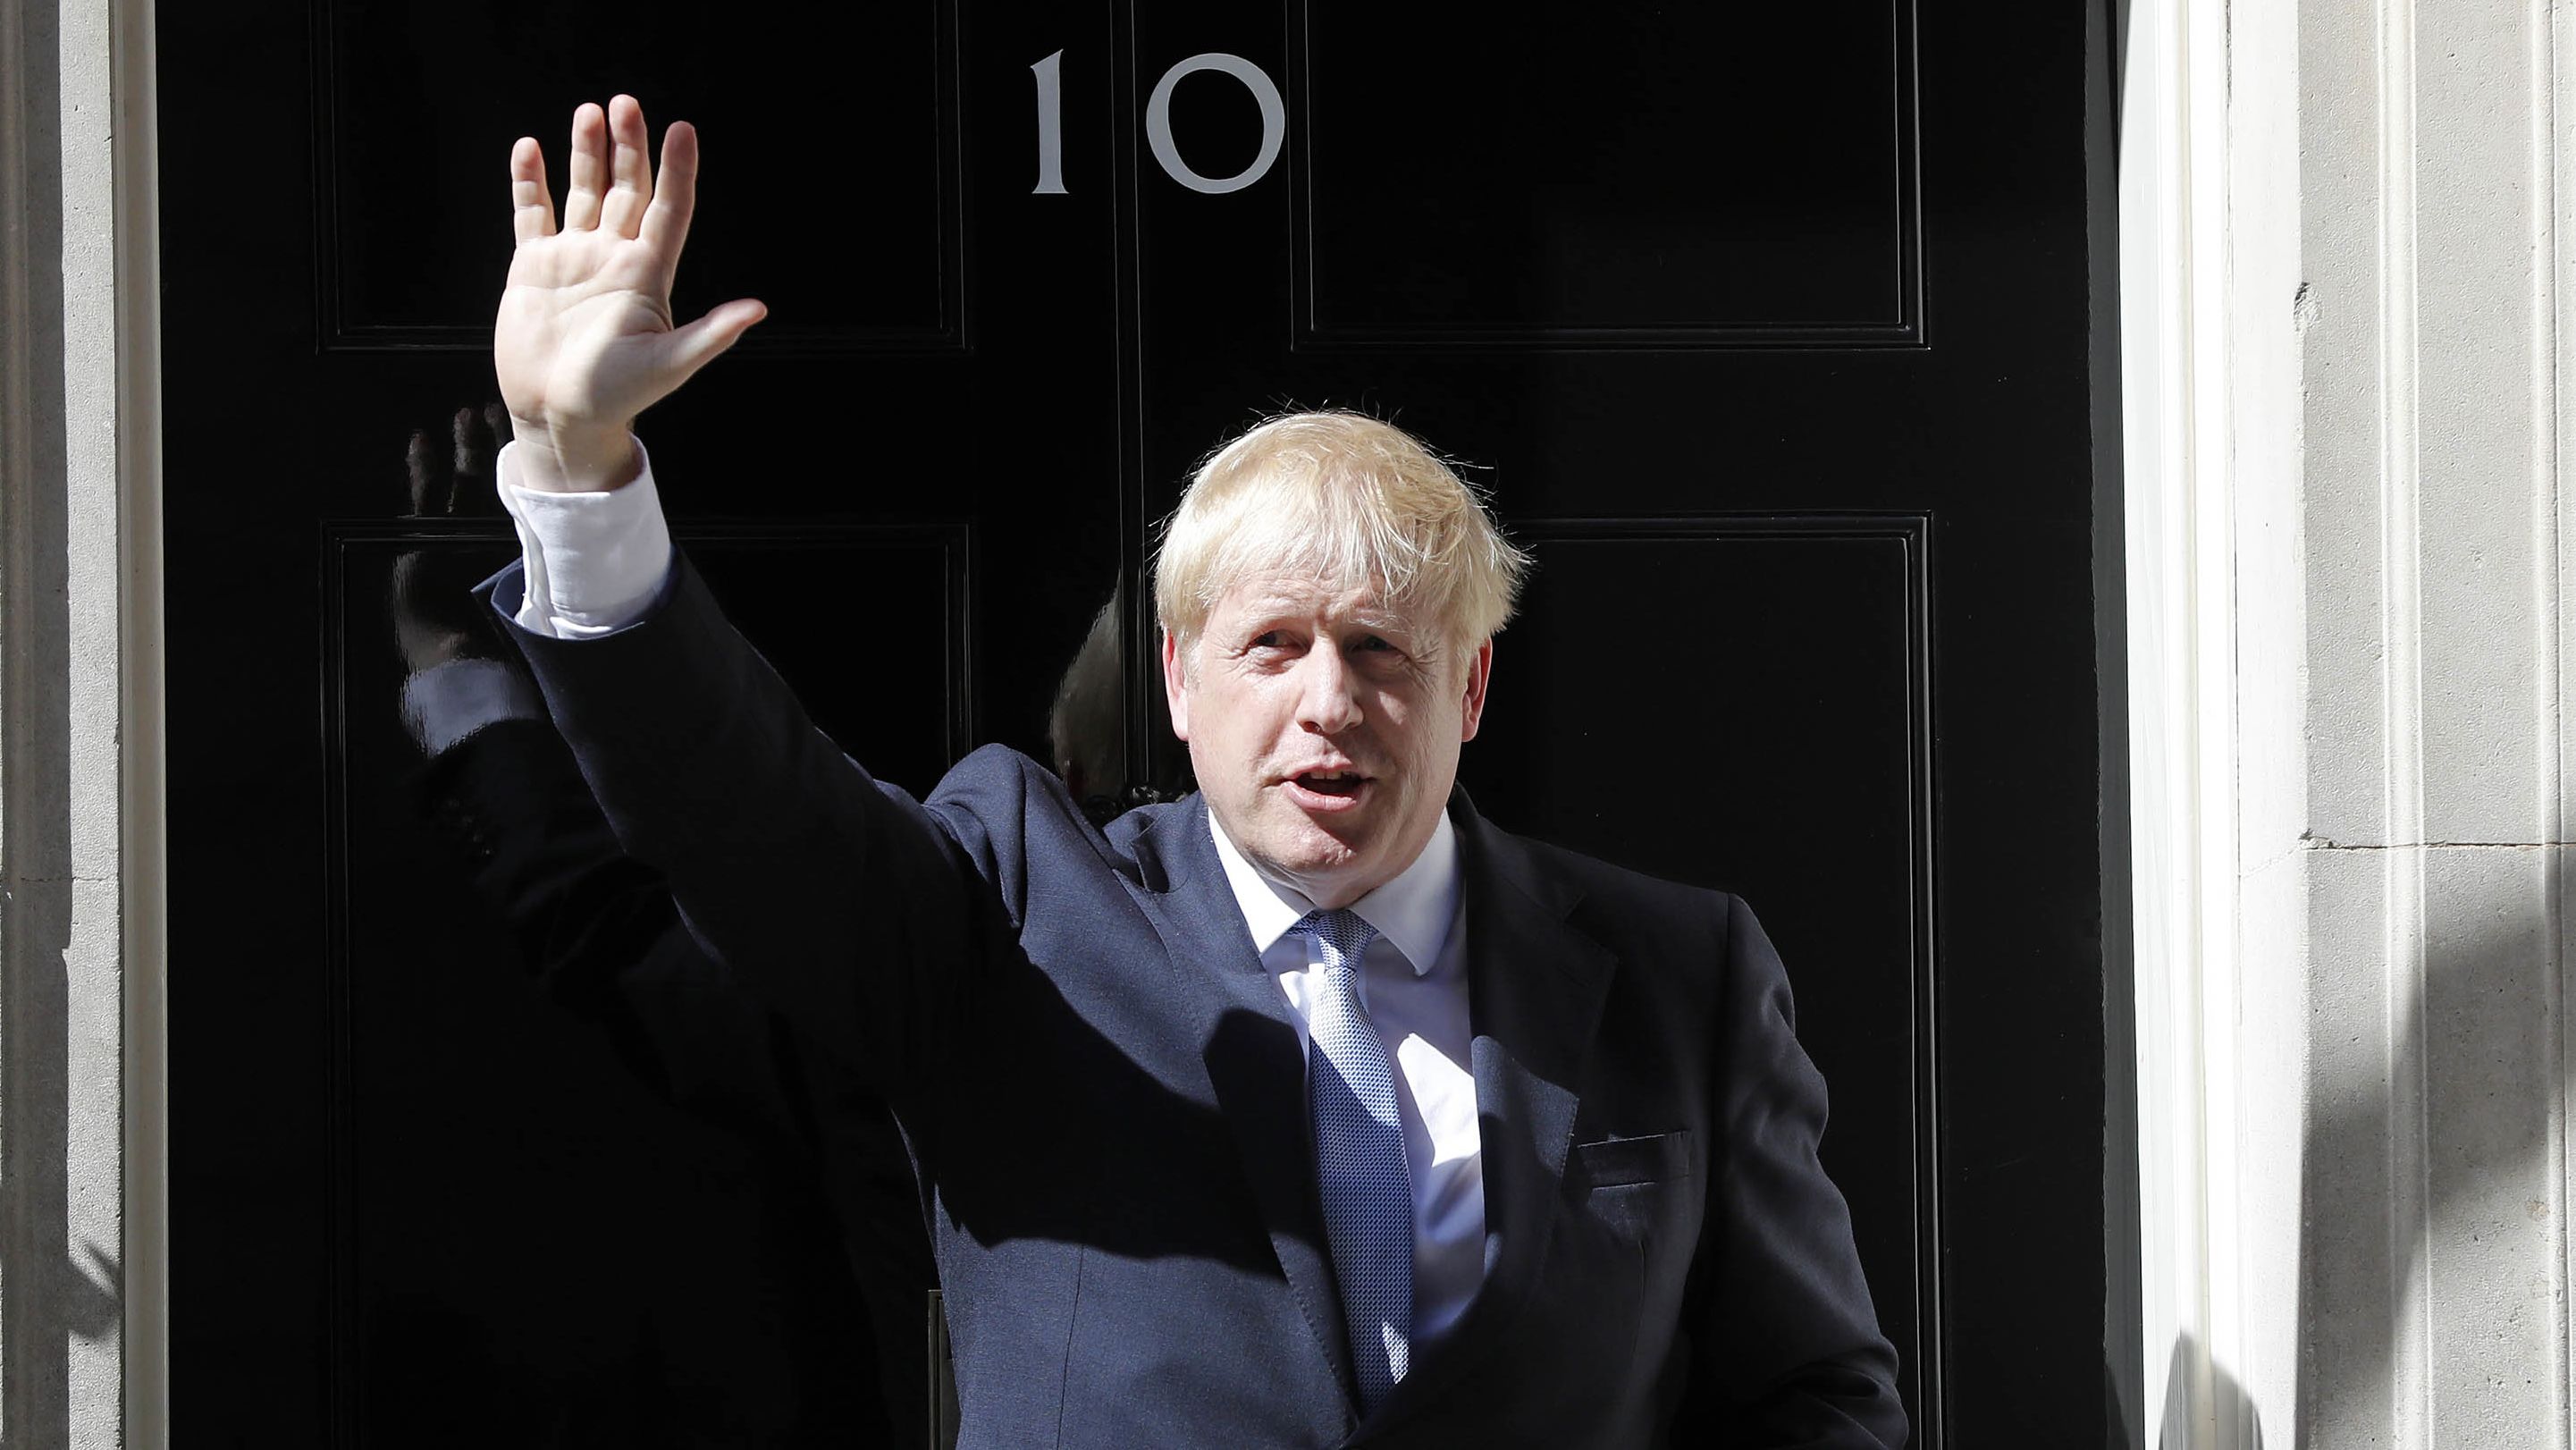 Boris Johnson waves from the steps of No. 10 Downing Street after giving a statement in London in July 2019. He had just become prime minister.